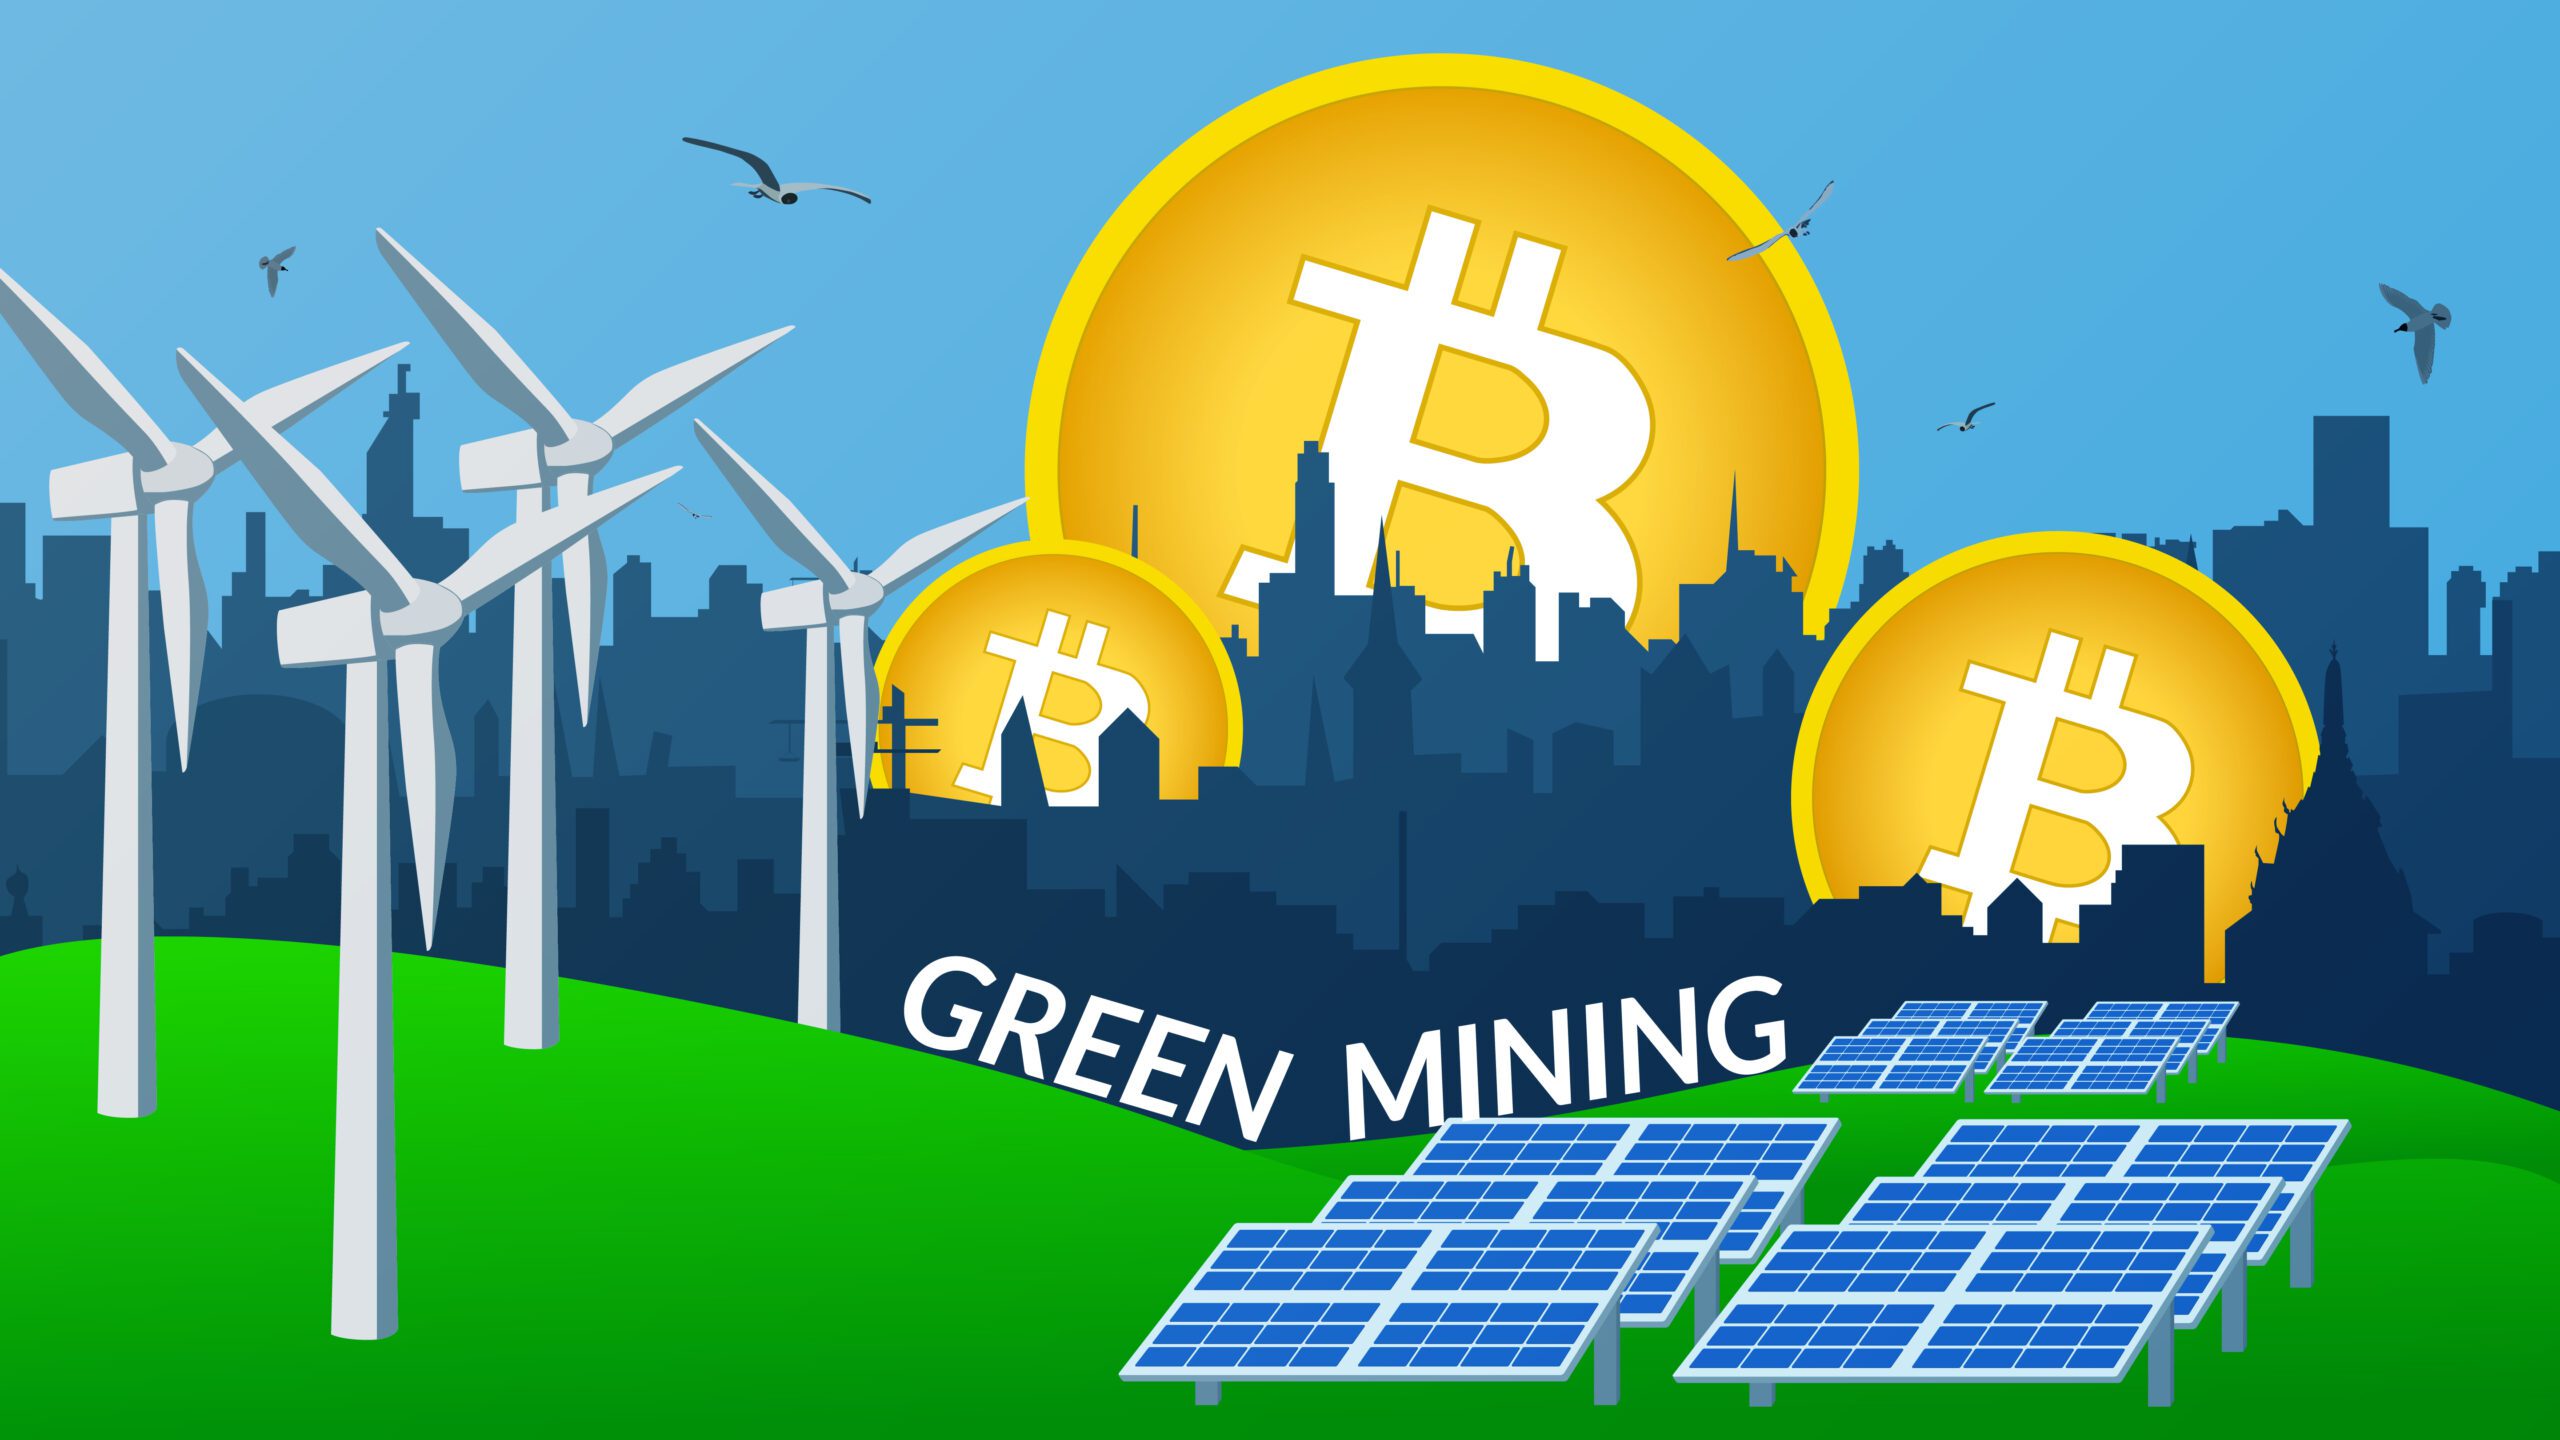 An infographic displaying solar panels and wind turbines as an option to power Bitcoin mining.